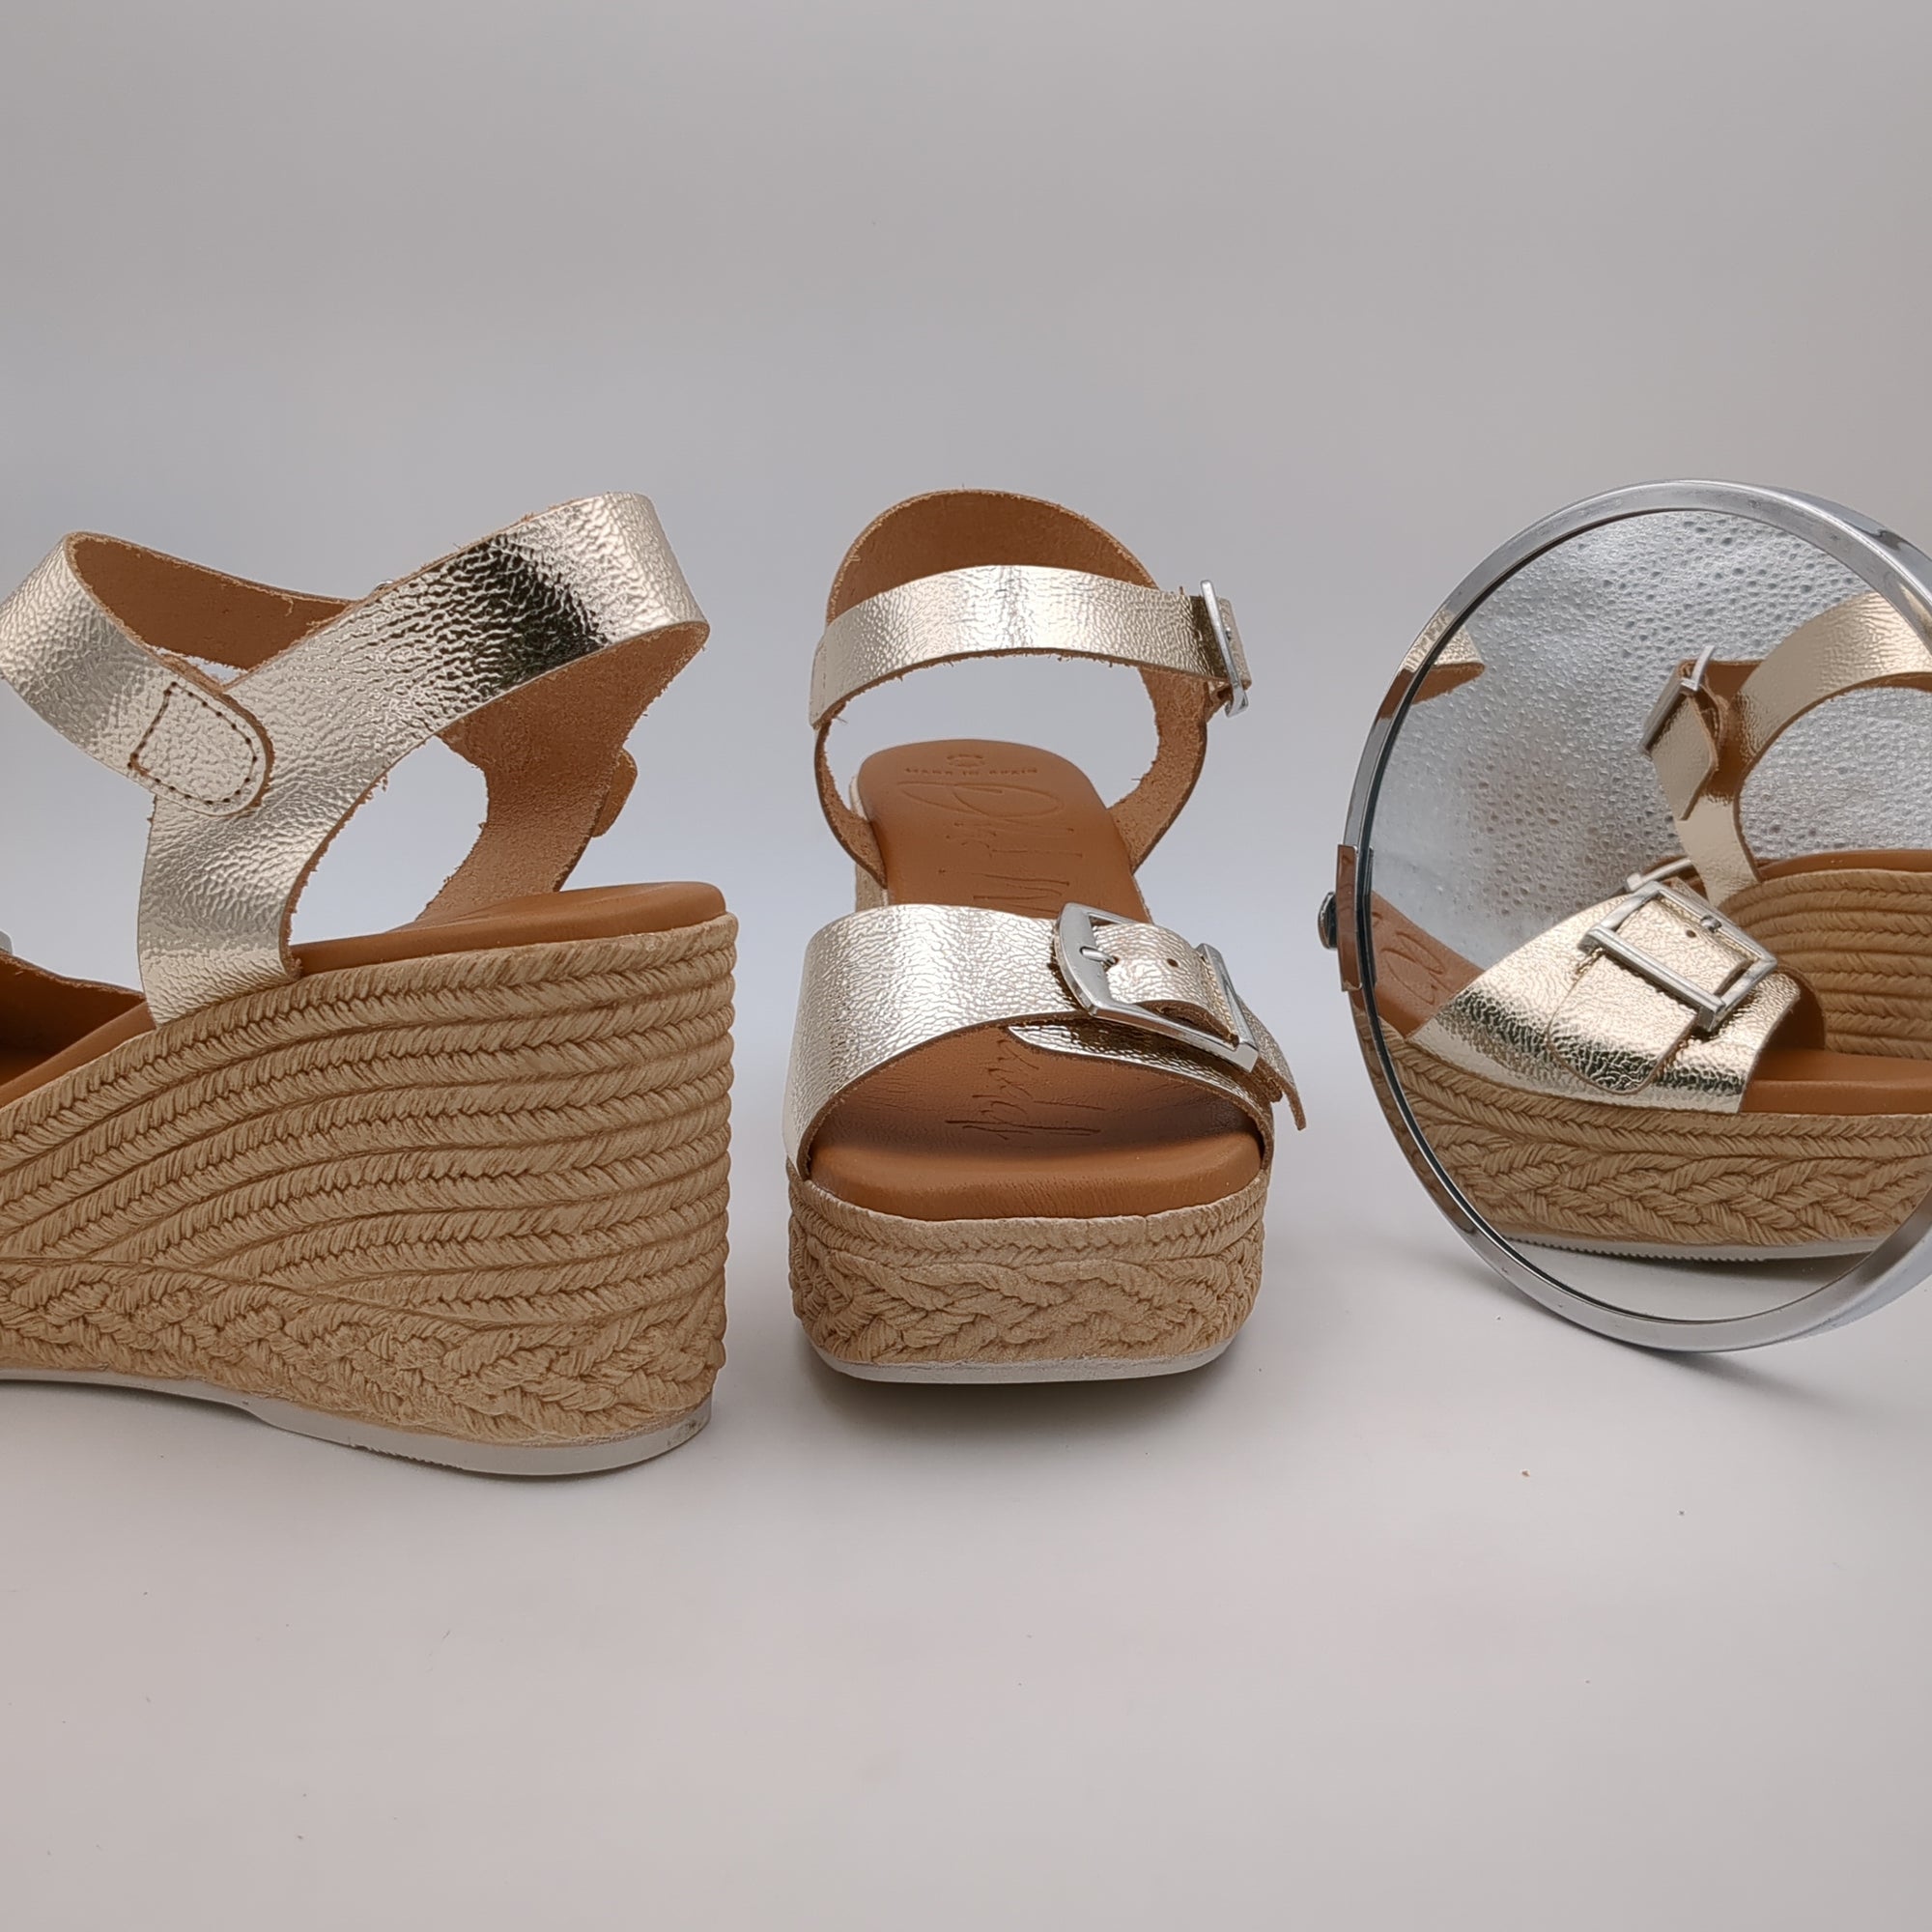 Oh My Sandals 5459 Gold Wedge Sandal